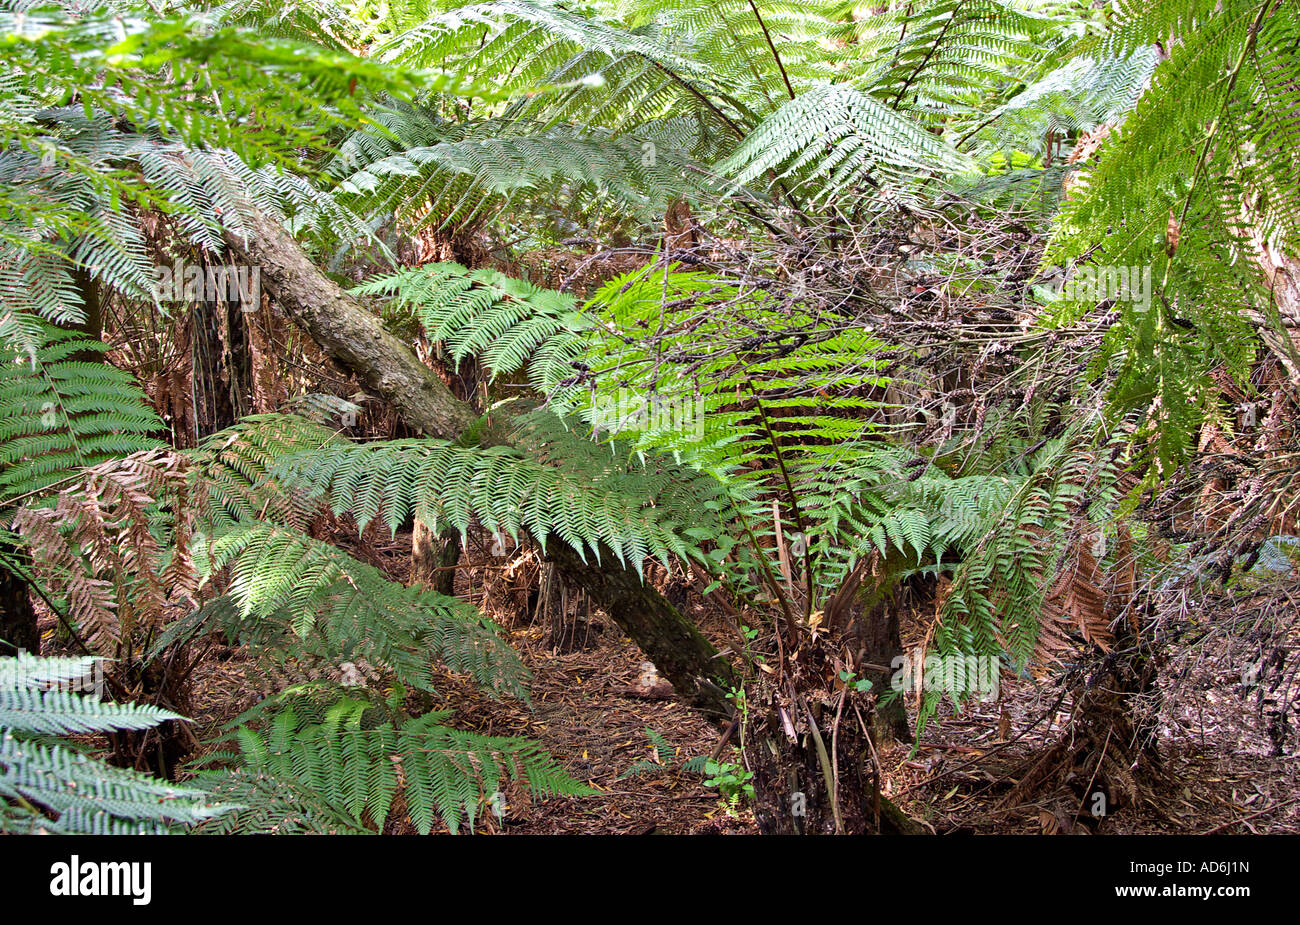 image of some nice rainforest ferns Stock Photo